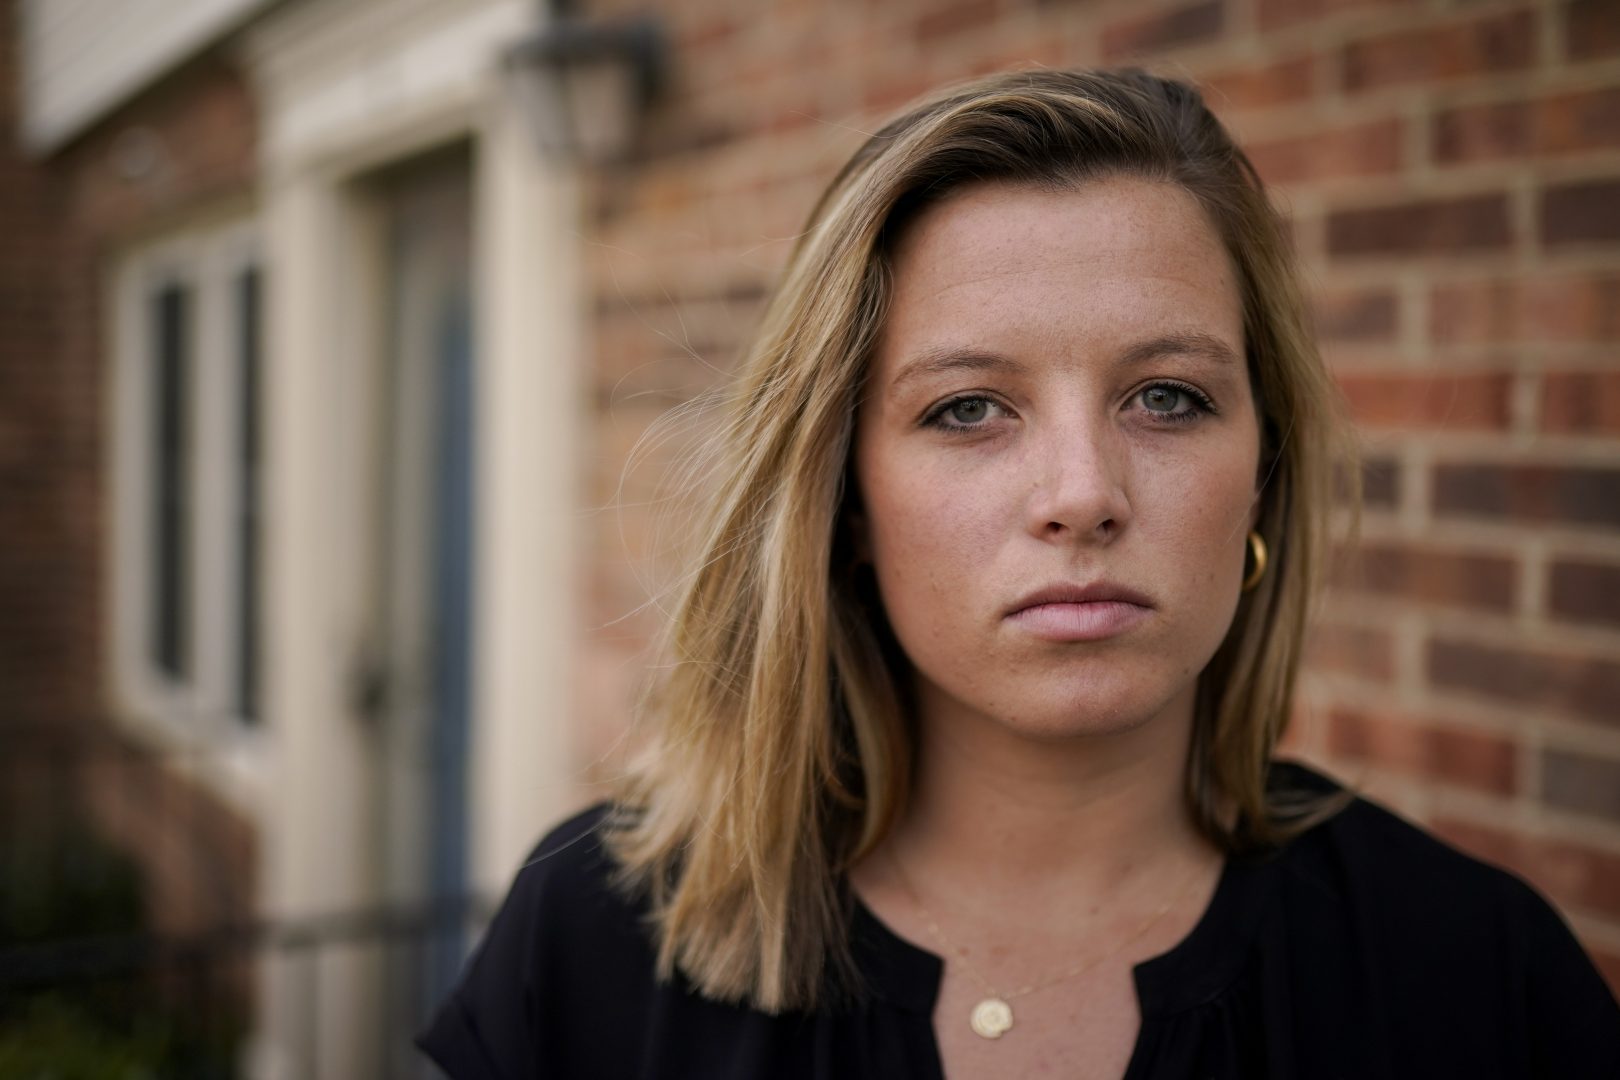 So I raped you.' Facebook message renews fight for justice for former  Gettysburg College student | WITF